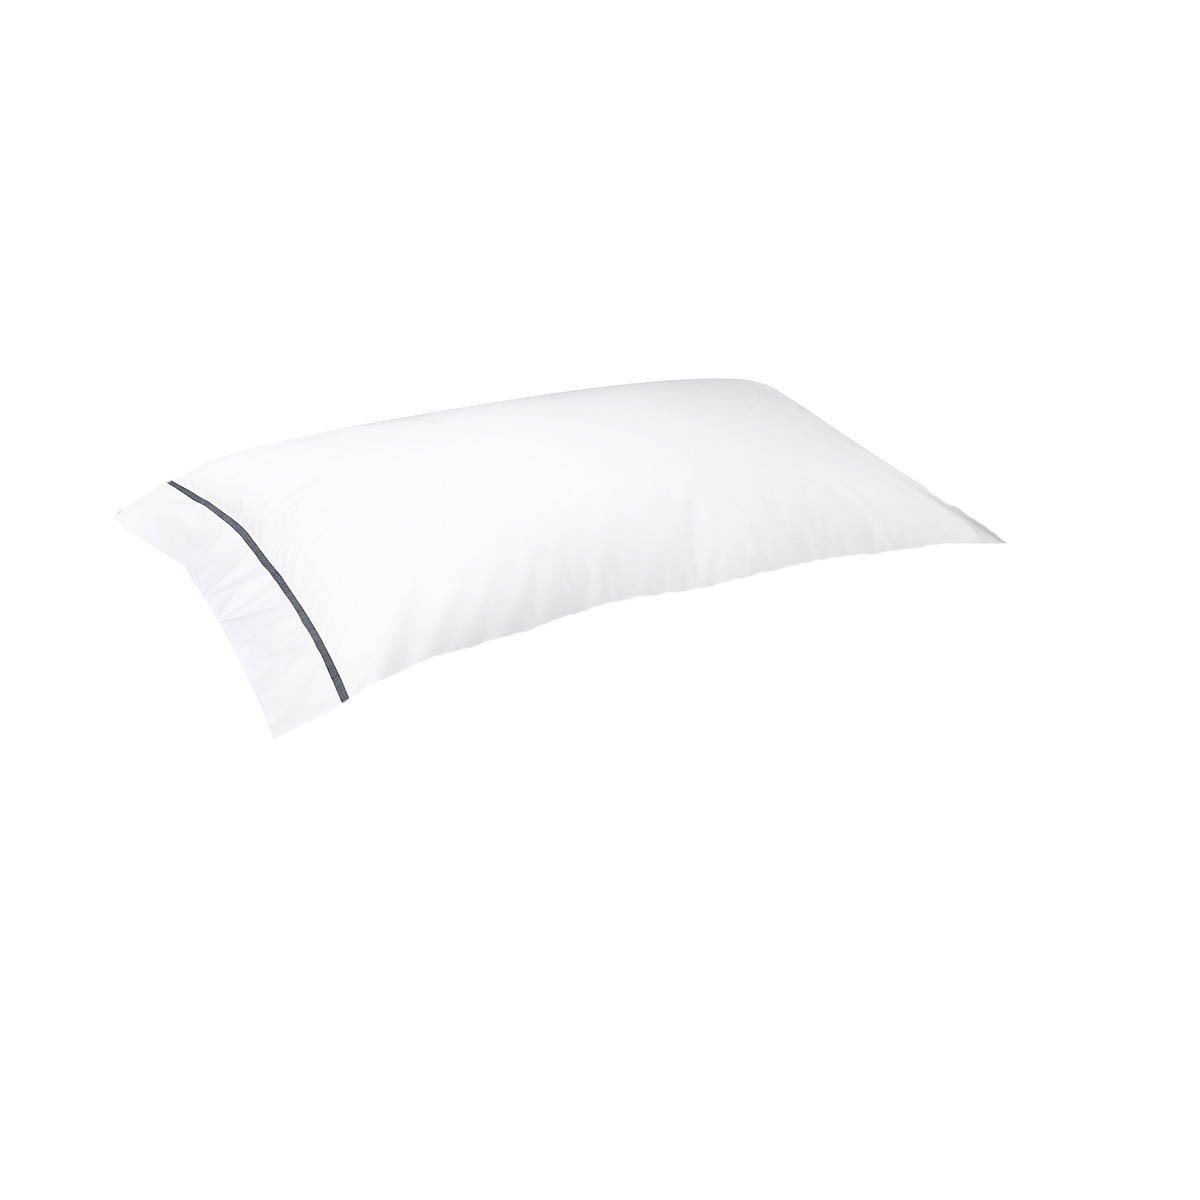 Athena Platine Bedding Collection by Yves Delorme | Fig Linens - White, cotton, pillowcase